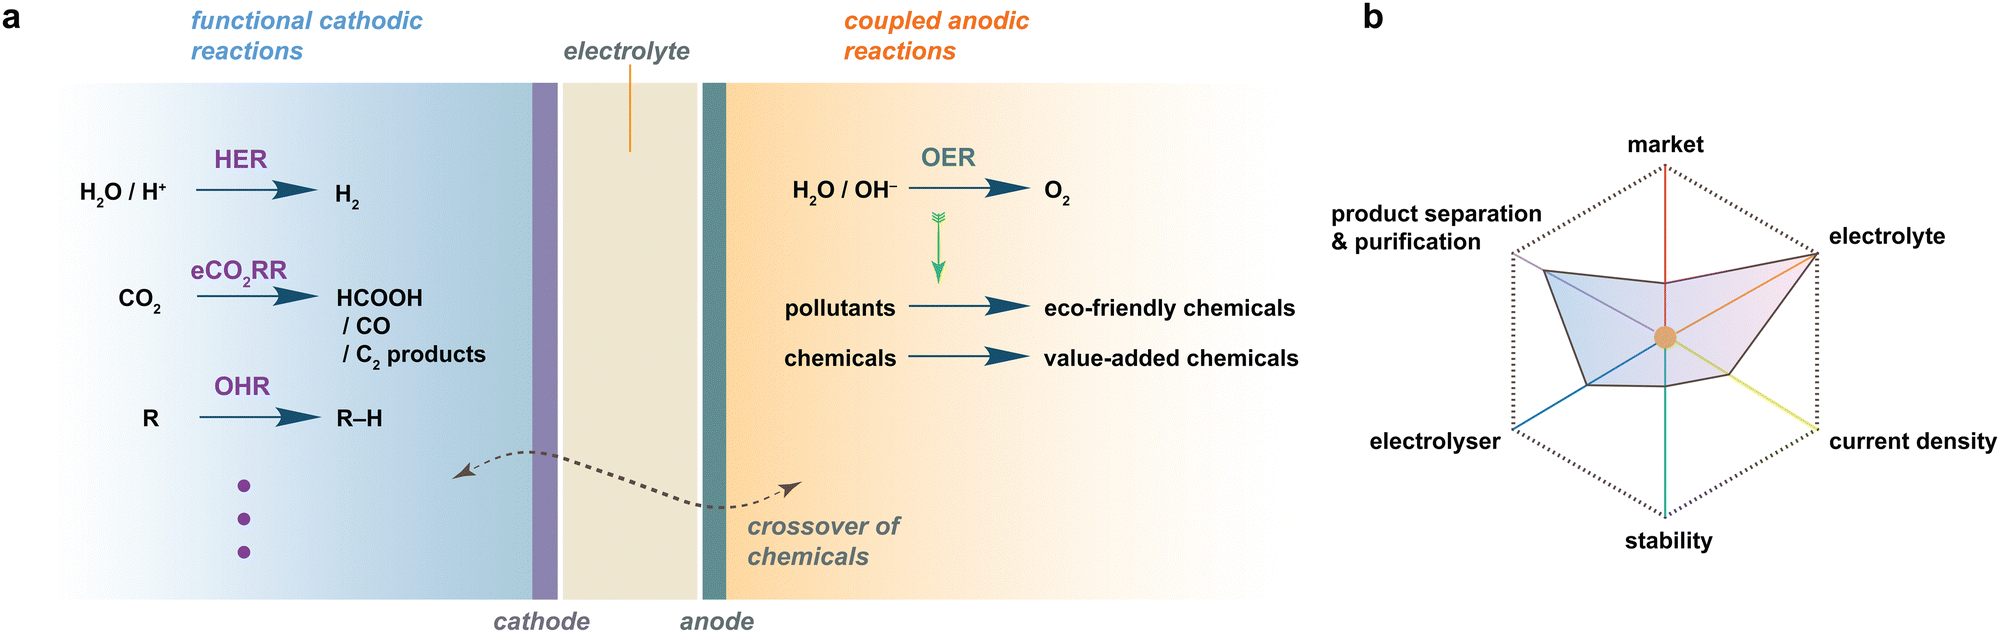 Screening potential anodic chemistry in lieu of the oxygen 